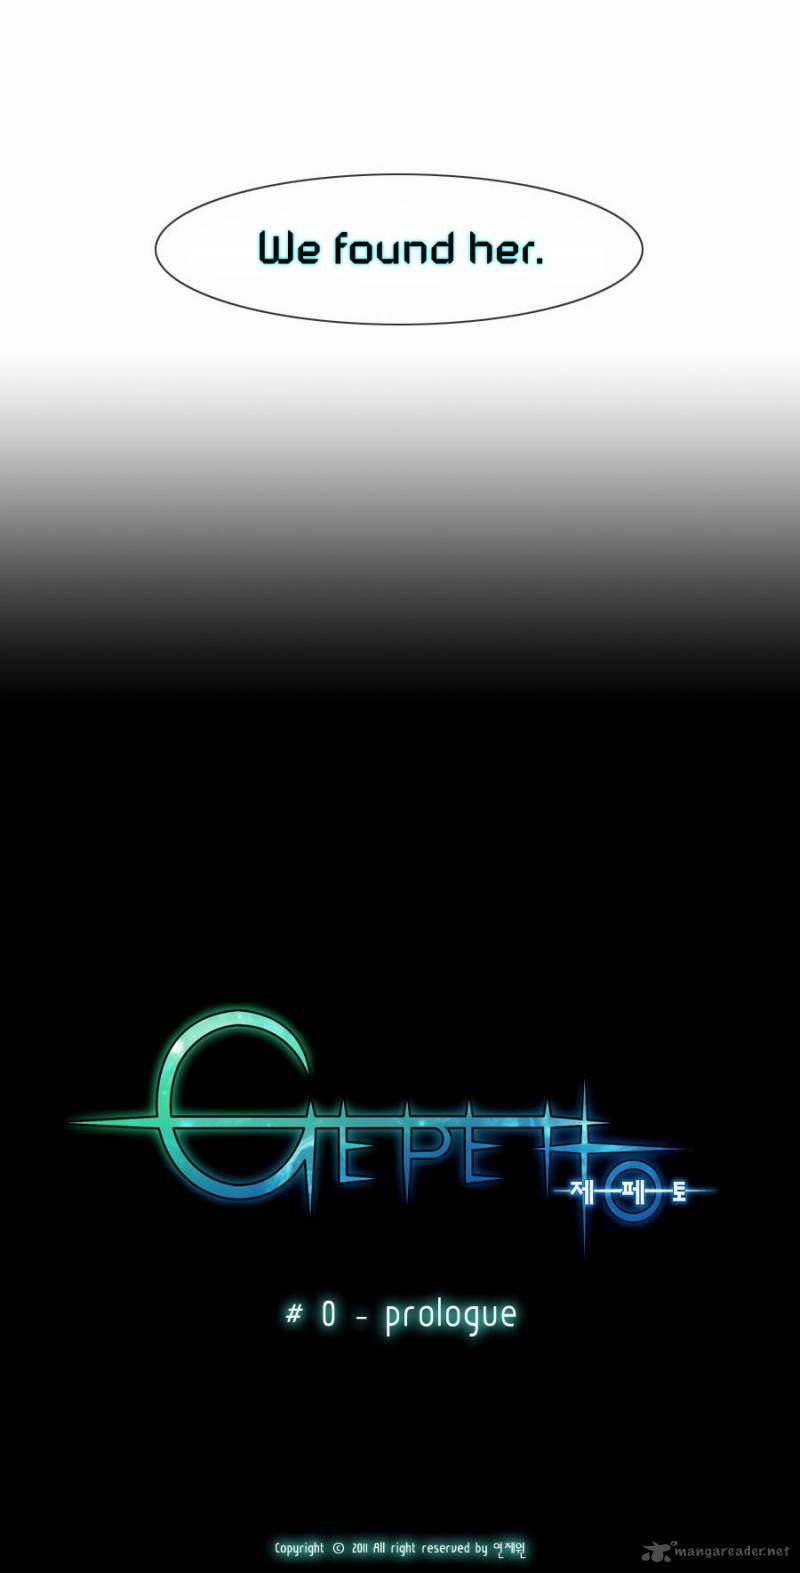 gepetto_1_26